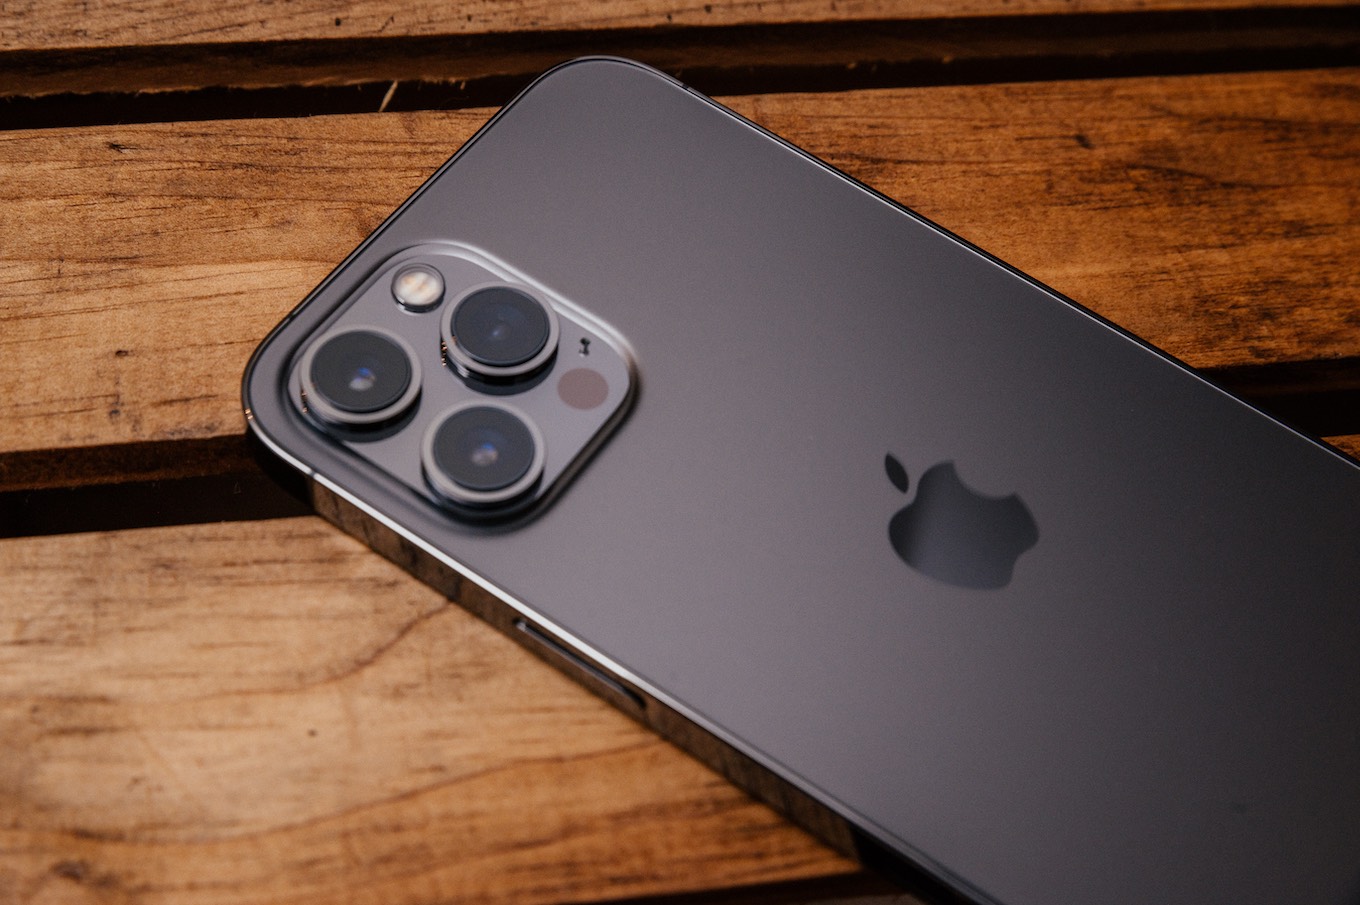 iPhone 12 Pro Max, the best smartphone camera overall